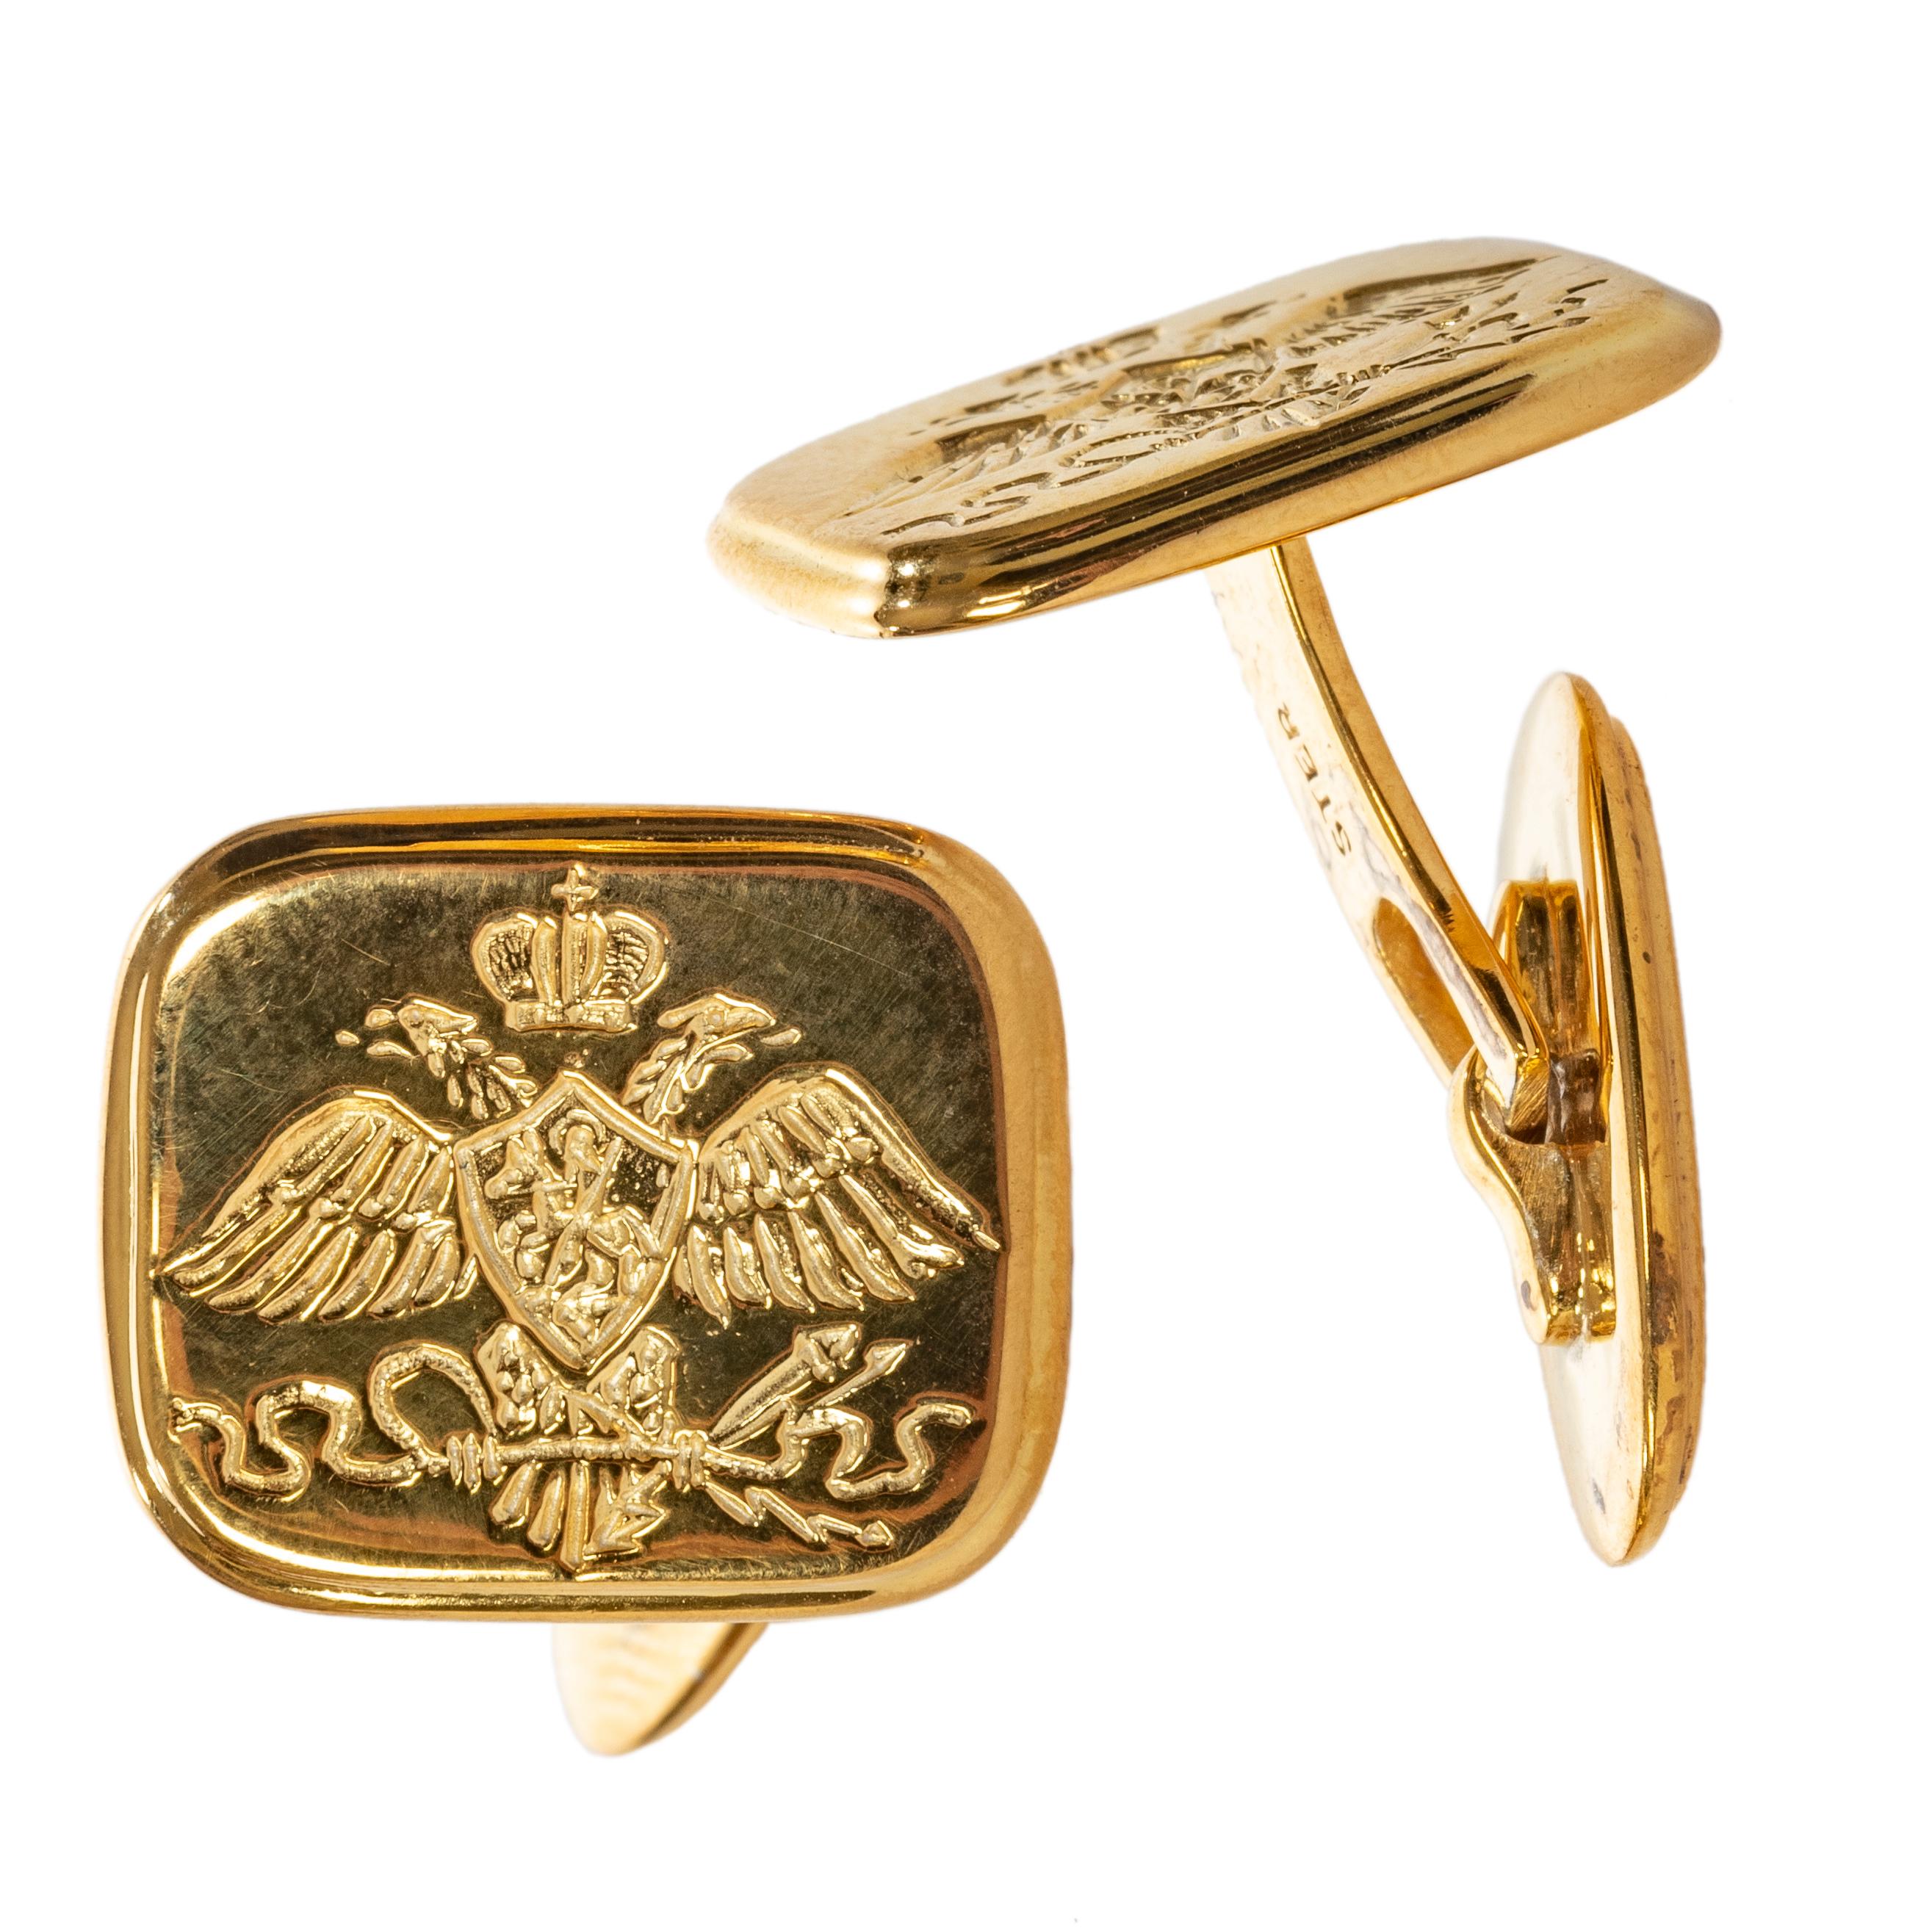 Nicholas I Romanov eagle cufflinks in gilded silver, each depicting Russian imperial eagle with downturned wings below a single Romanov crown in the Neoclassical version made famous by Tsar Nicholas I (1825-55). Based on a European 19th century